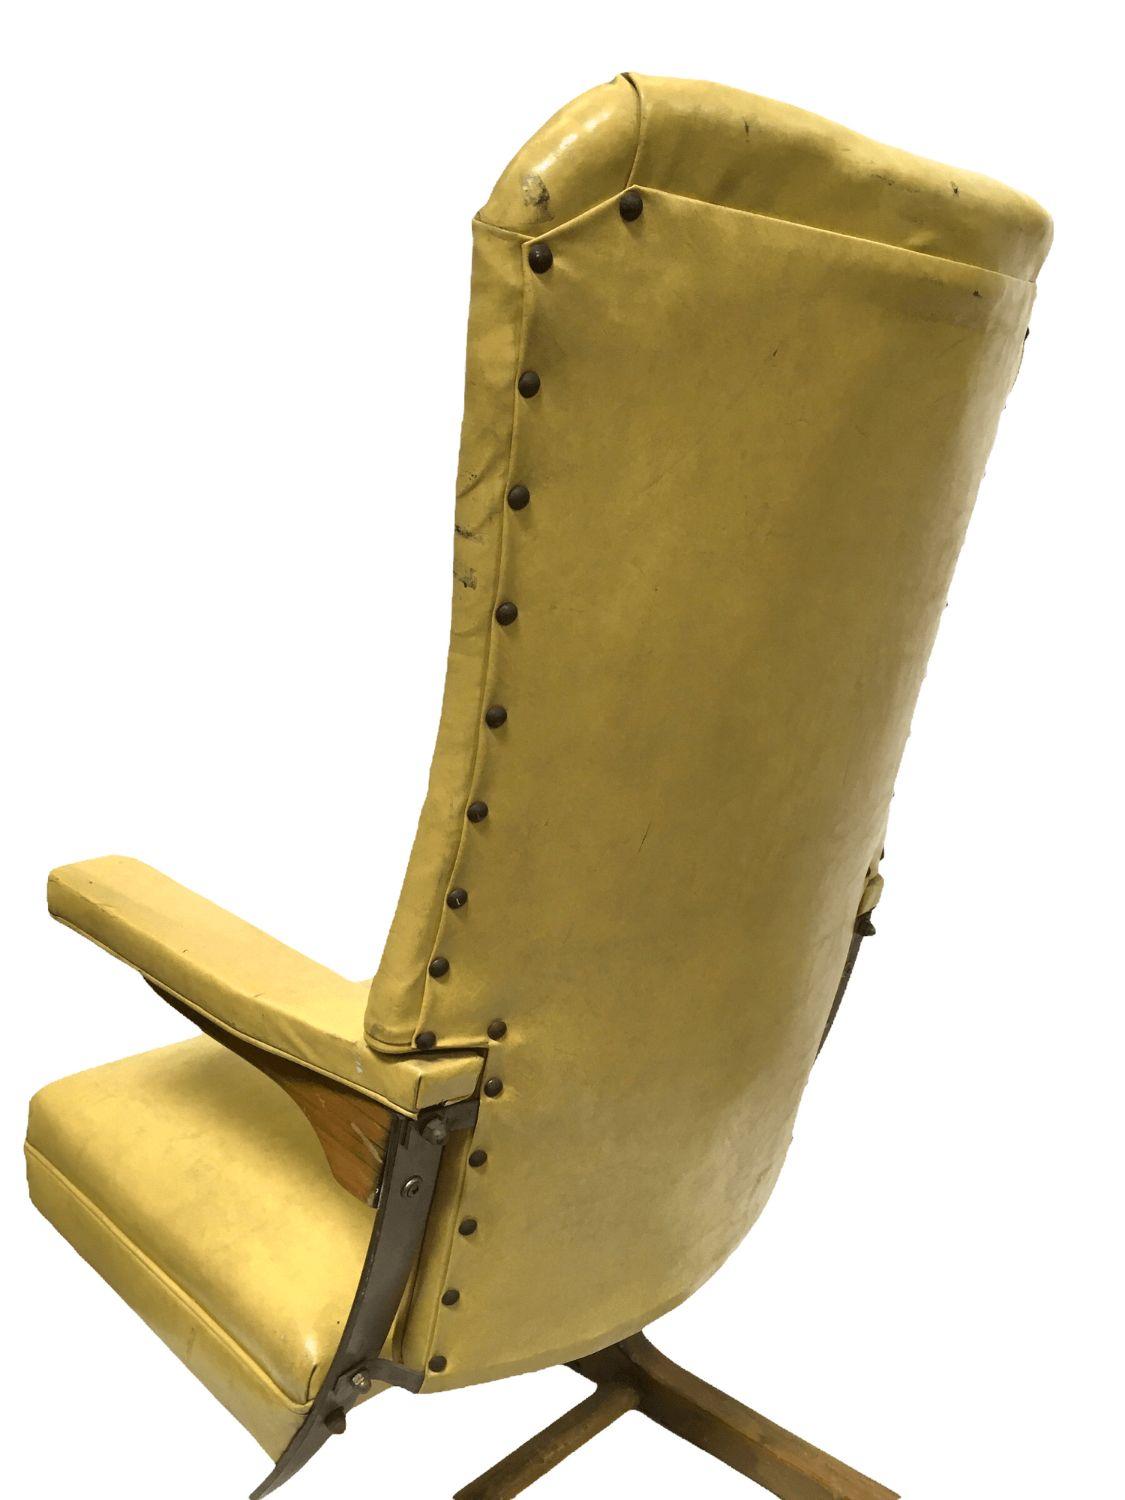 Vintage Rock-a-Chair Cantilever Rocker Chair in Harvest Gold Vinyl In Good Condition For Sale In Van Nuys, CA